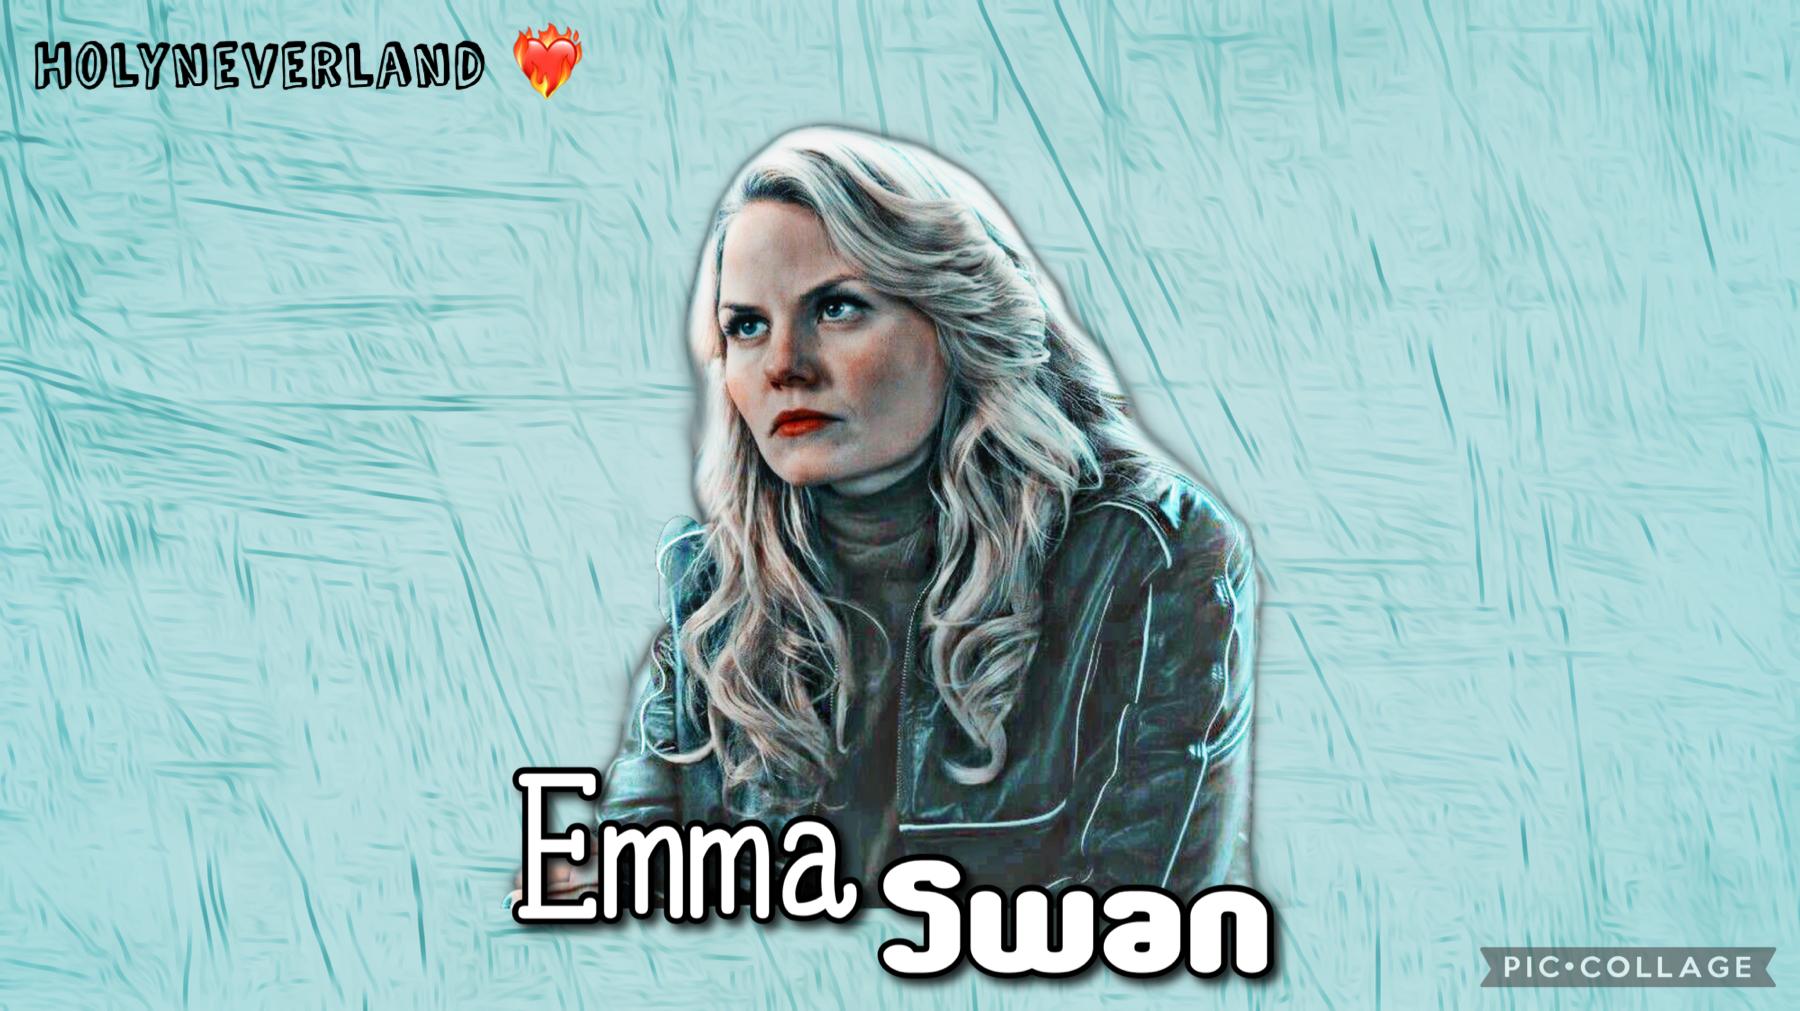 Emma swan 🤩❤️‍🔥 (a tumbnail for an upcoming edit) it’s simple and cute enjoy!!!
 
Rate/10 💕